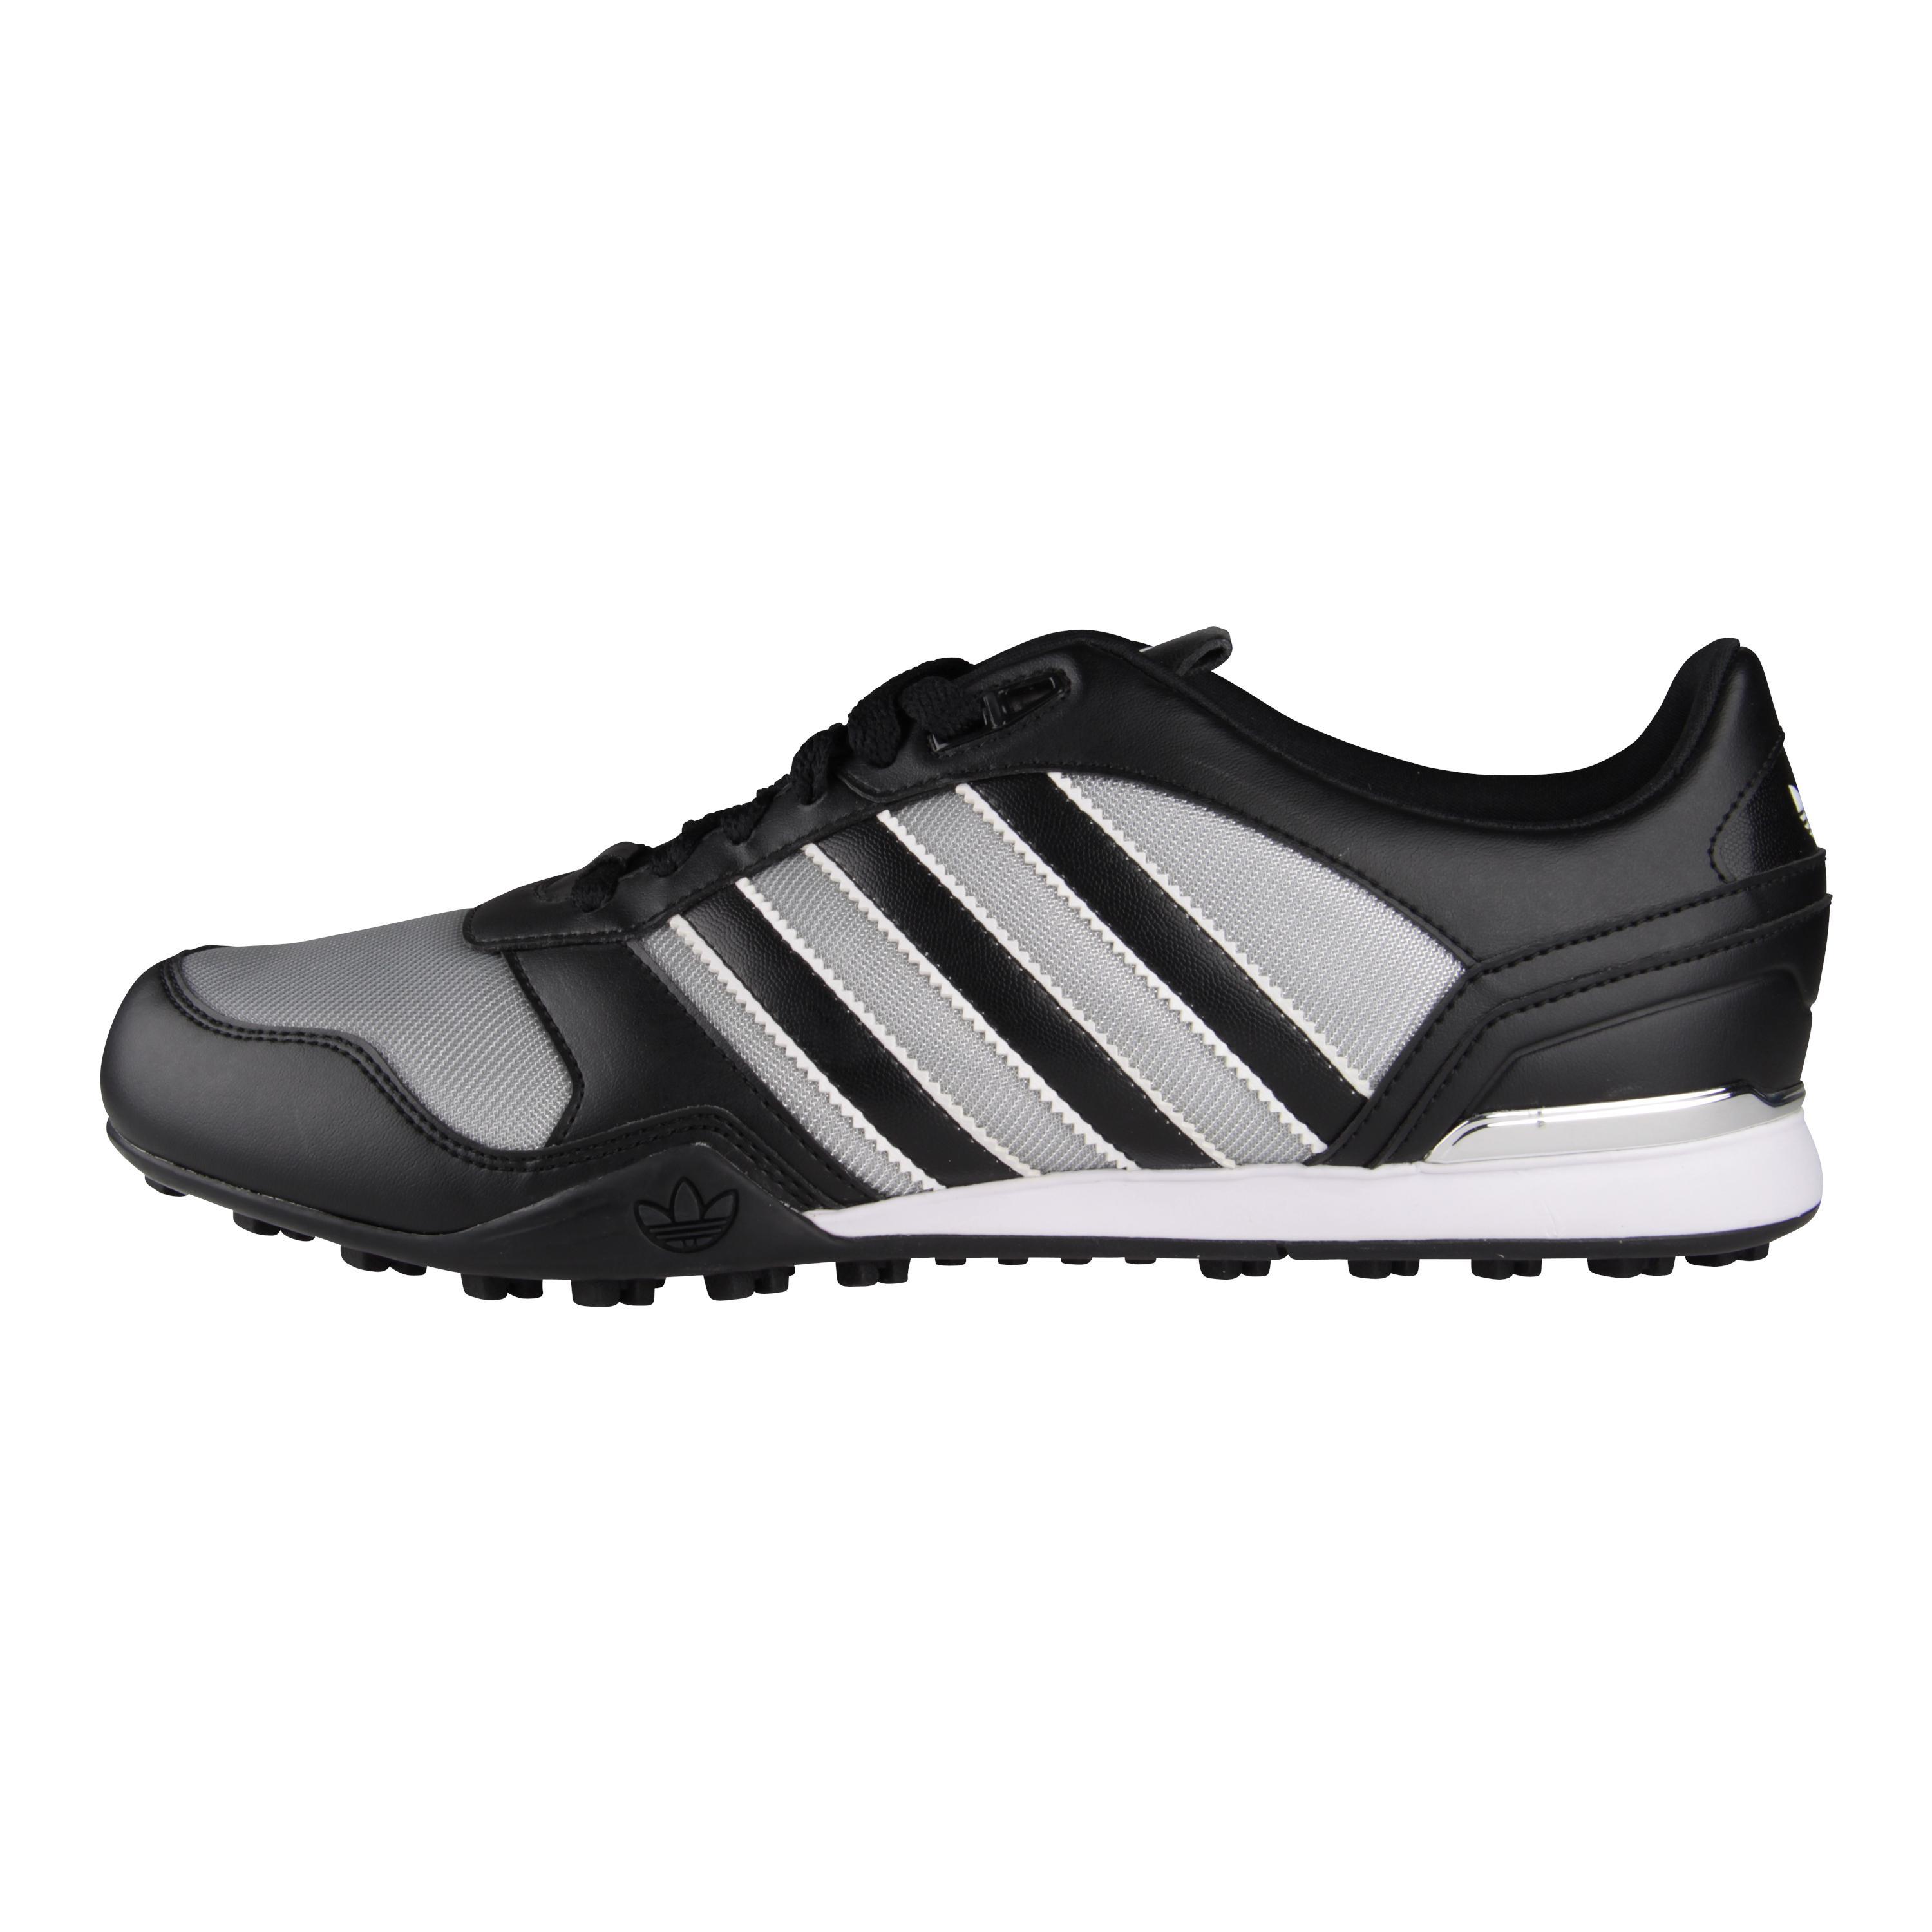 Foto adidas Zx Country 2 foto 301025